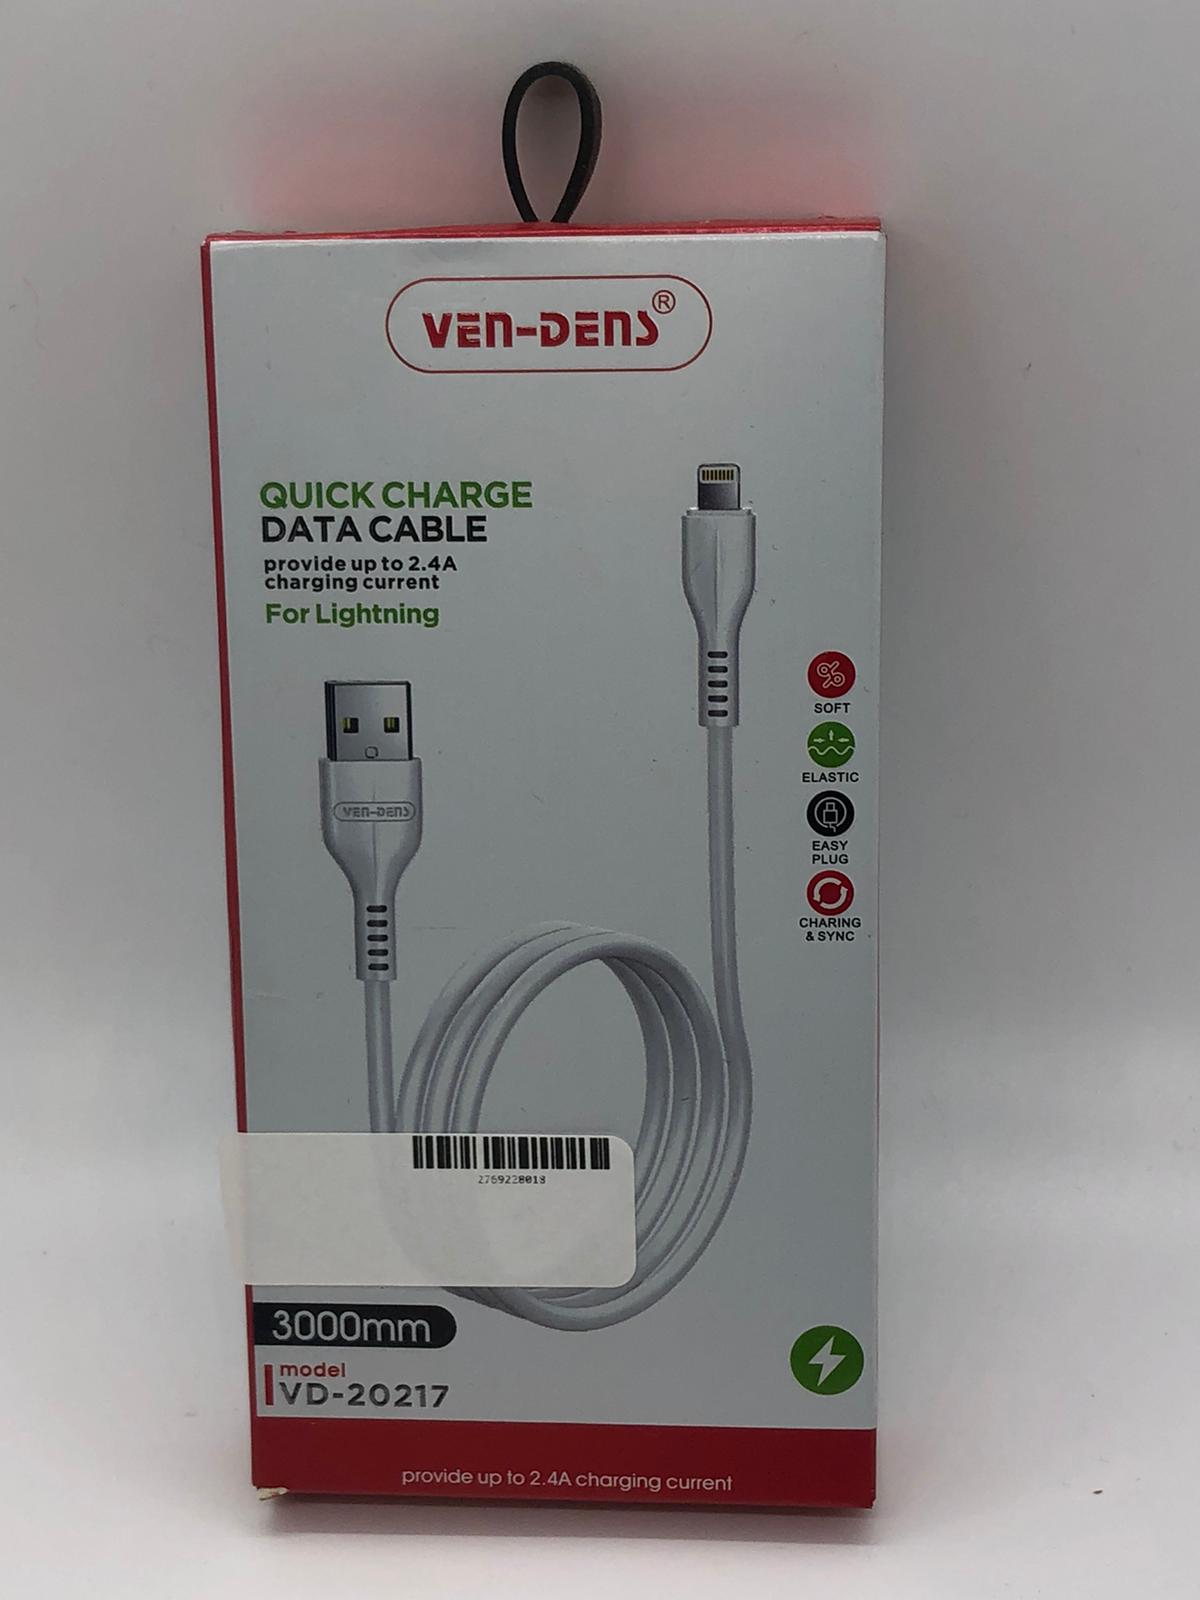 Ven-dens Quick Charge Data Cable